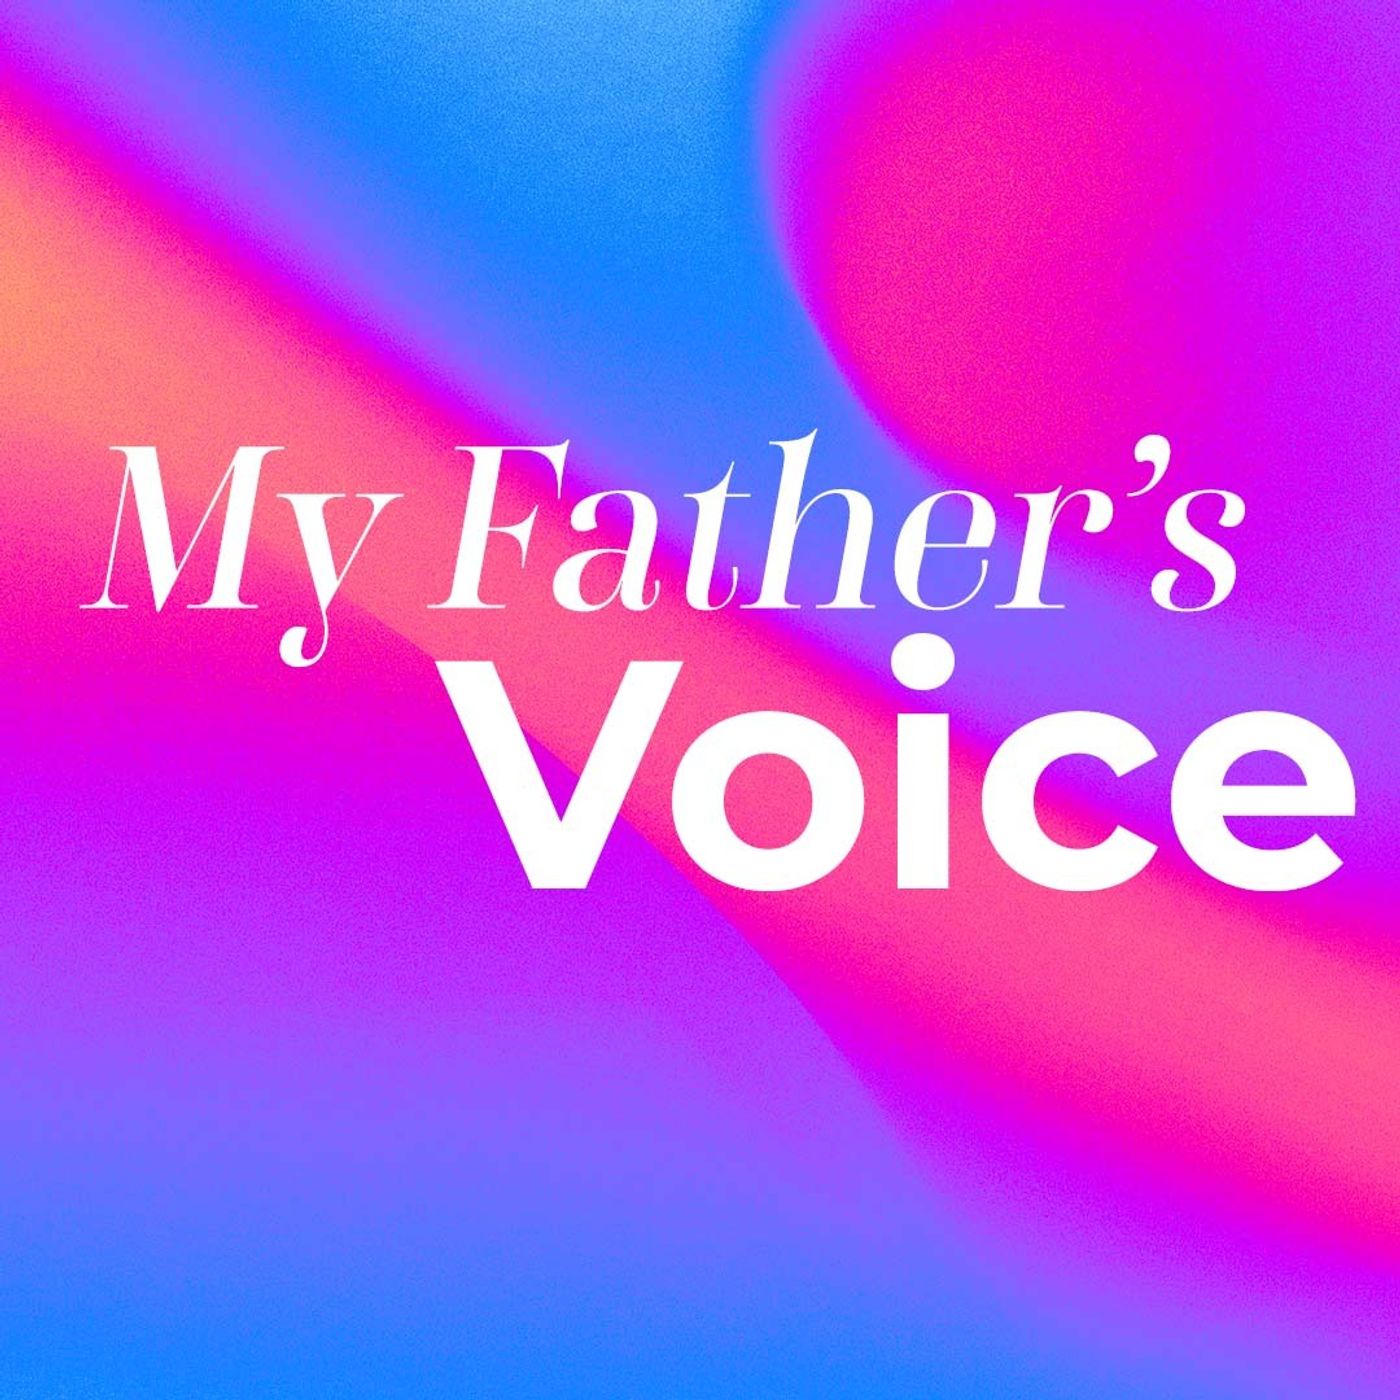 My Father's Voice